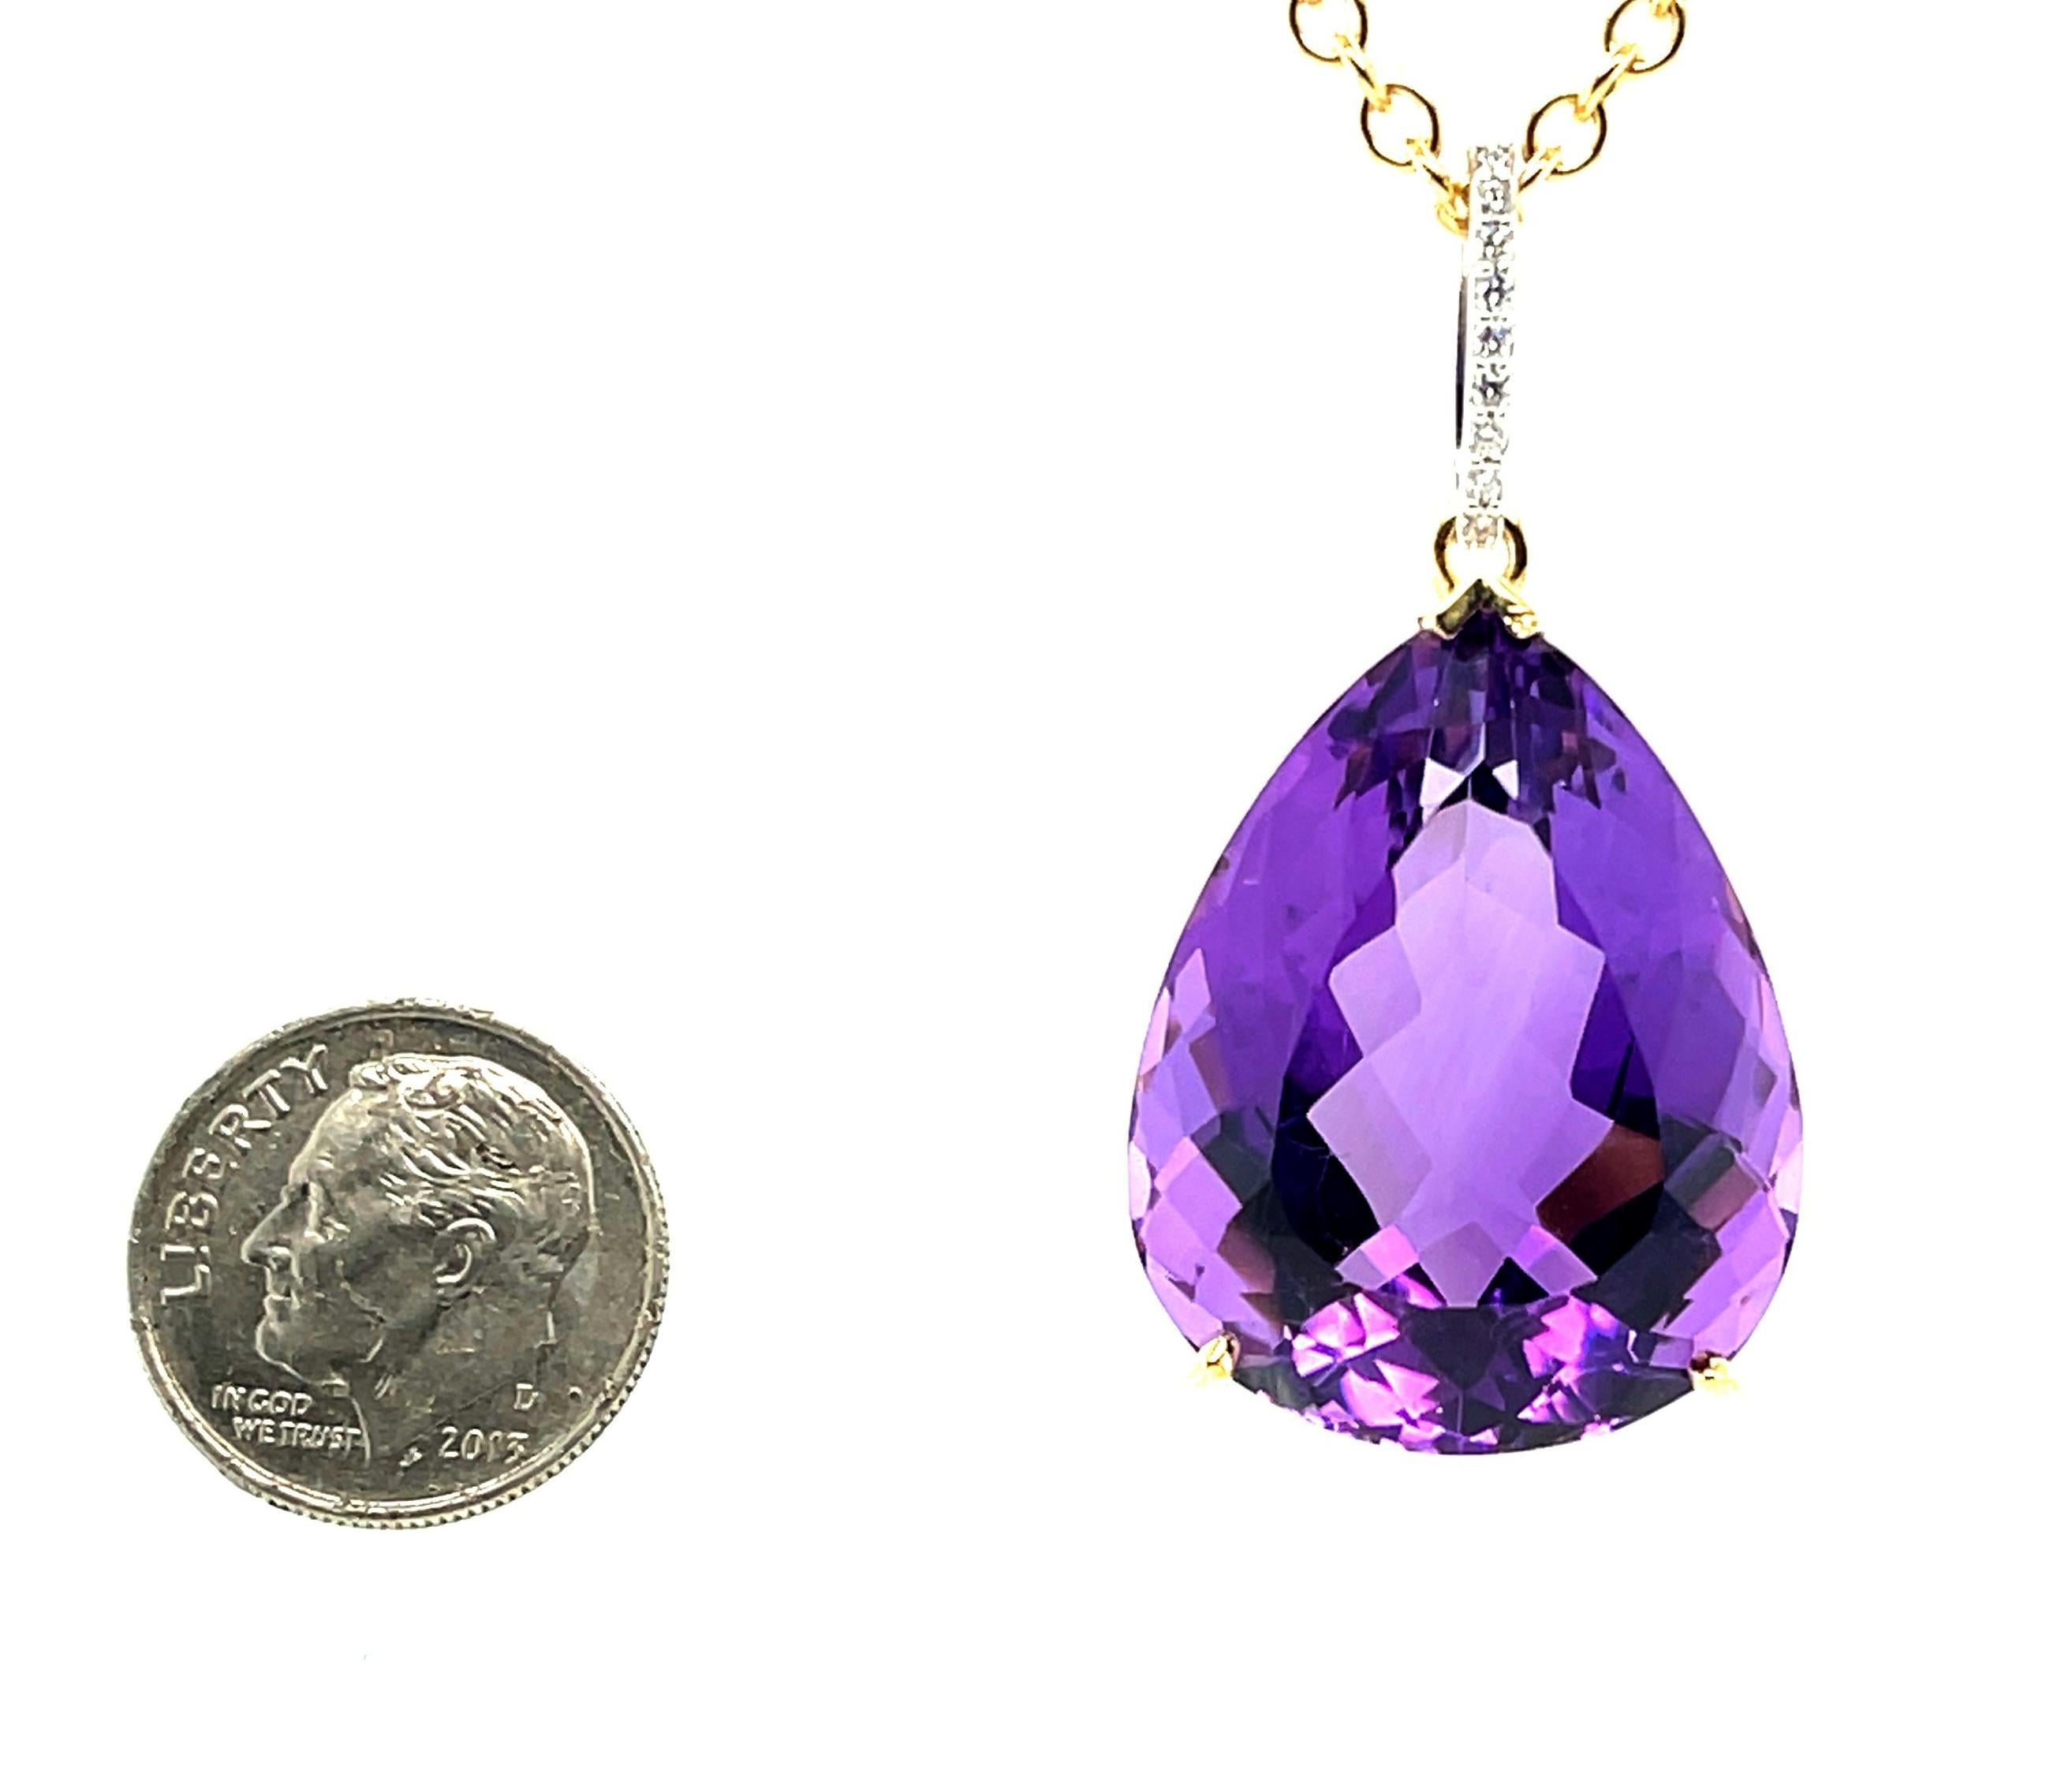 40 Carat Pear Shape Amethyst and Diamond Pendant in 18k Yellow Gold with Chain For Sale 1